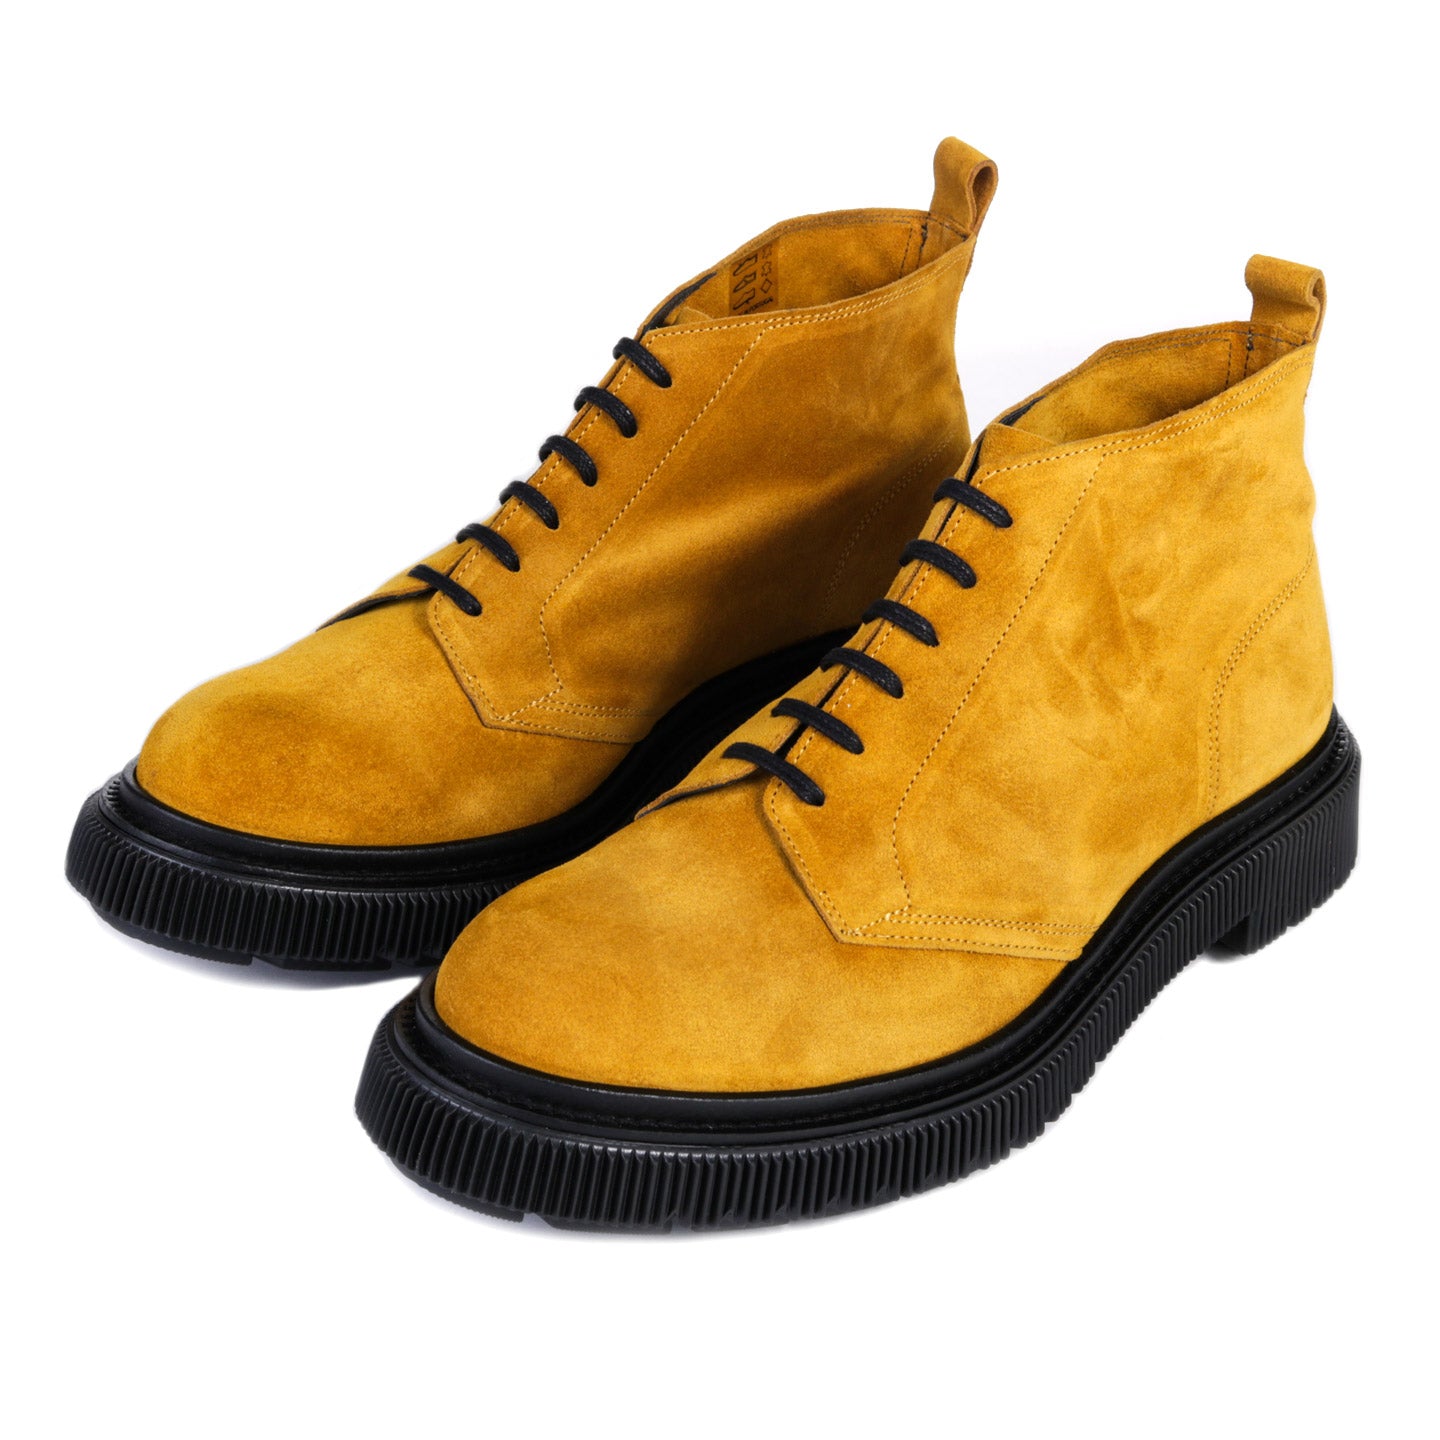 ADIEU TYPE 121 BOOT SUEDE GINGERBREAD